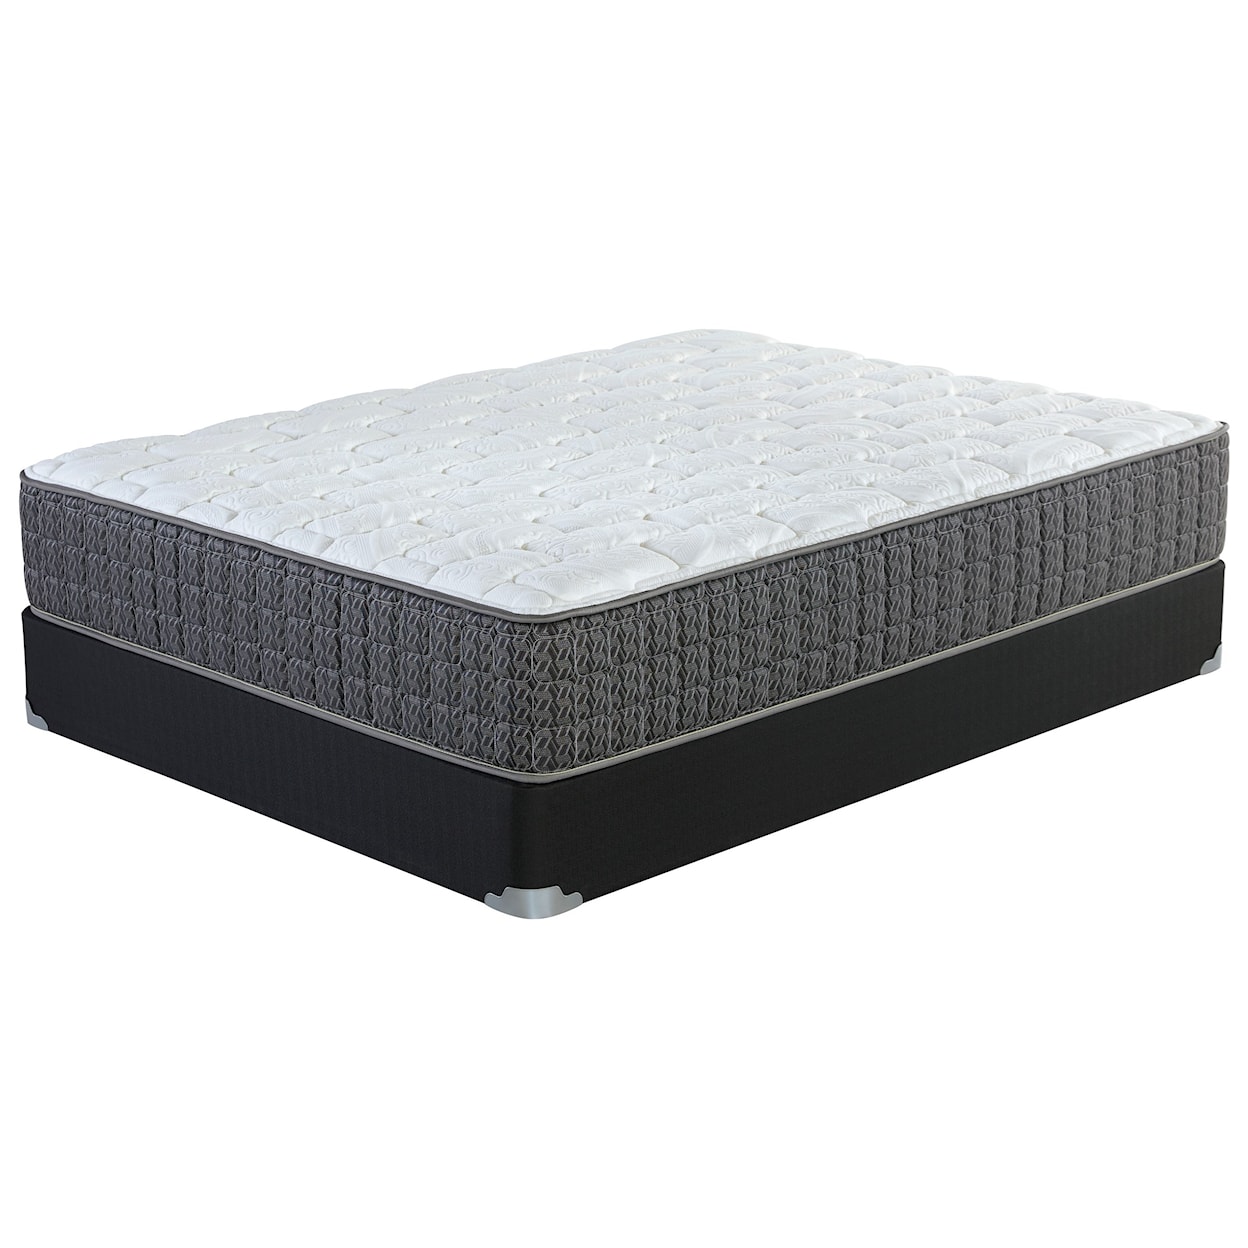 Corsicana Kinley Firm Twin Firm Pocketed Coil Mattress Set